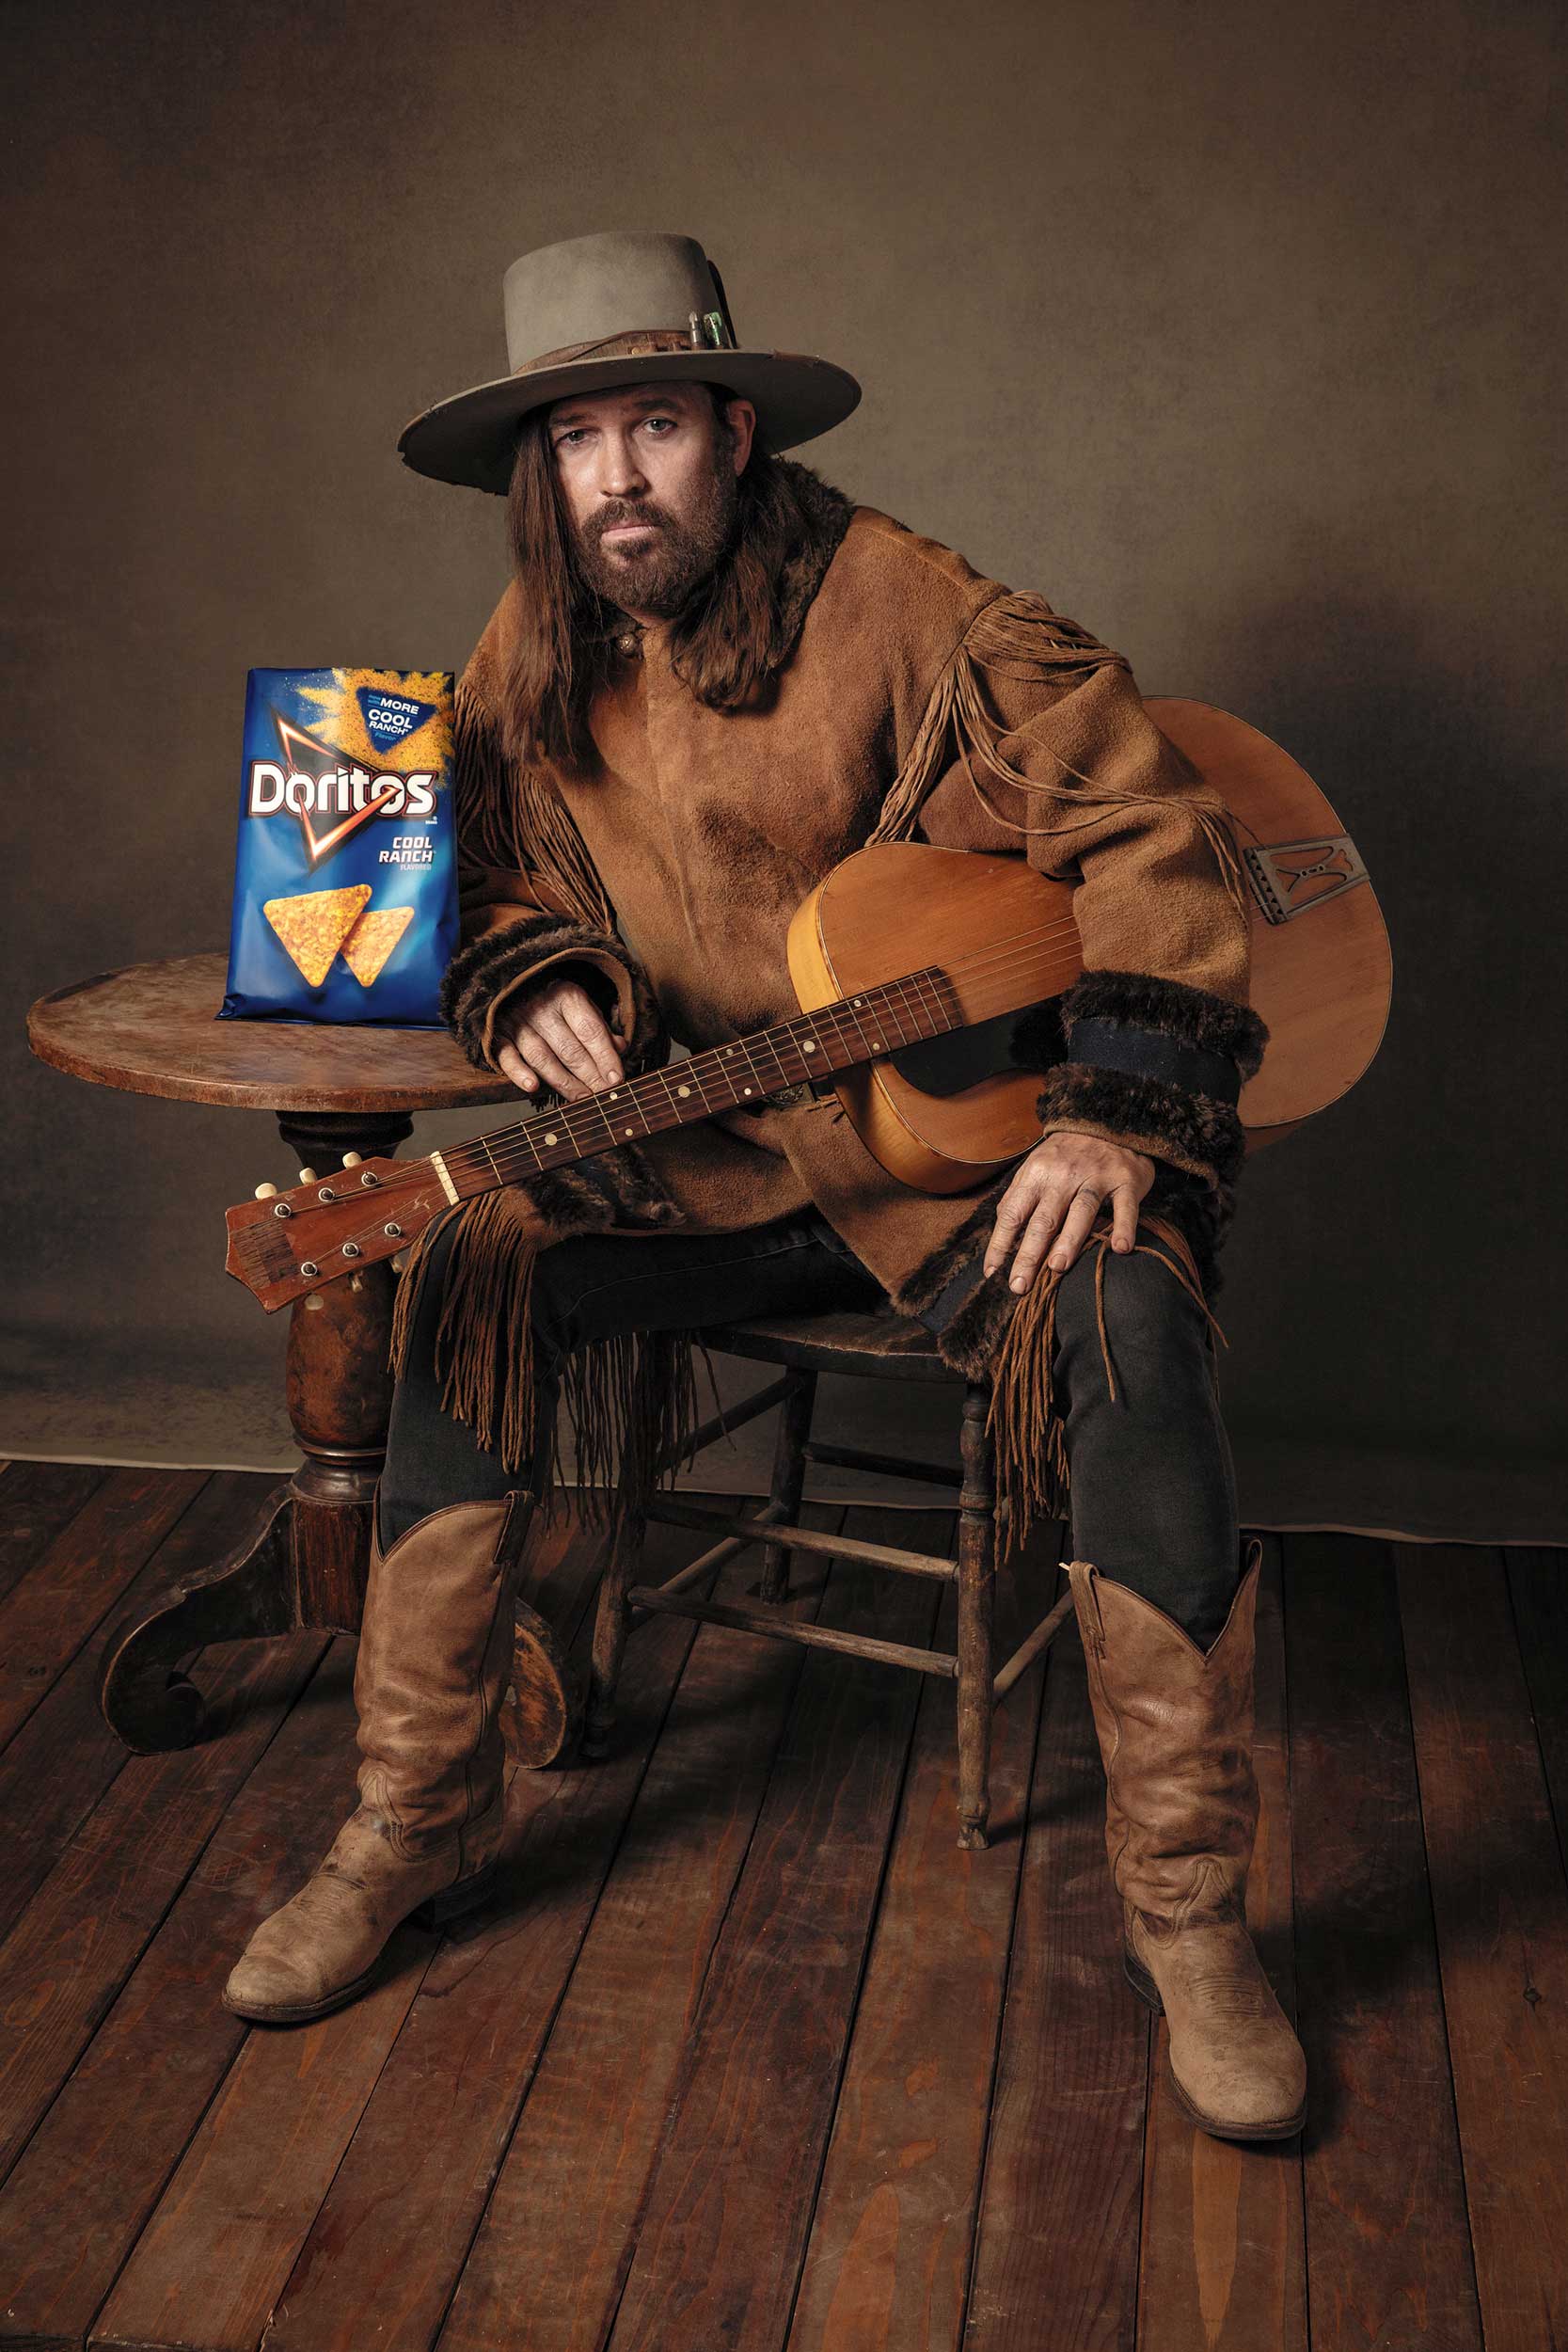 The 2020 TVC will be the first time that the beloved Cool Ranch flavor gets the spotlight in a Doritos Super Bowl ad.